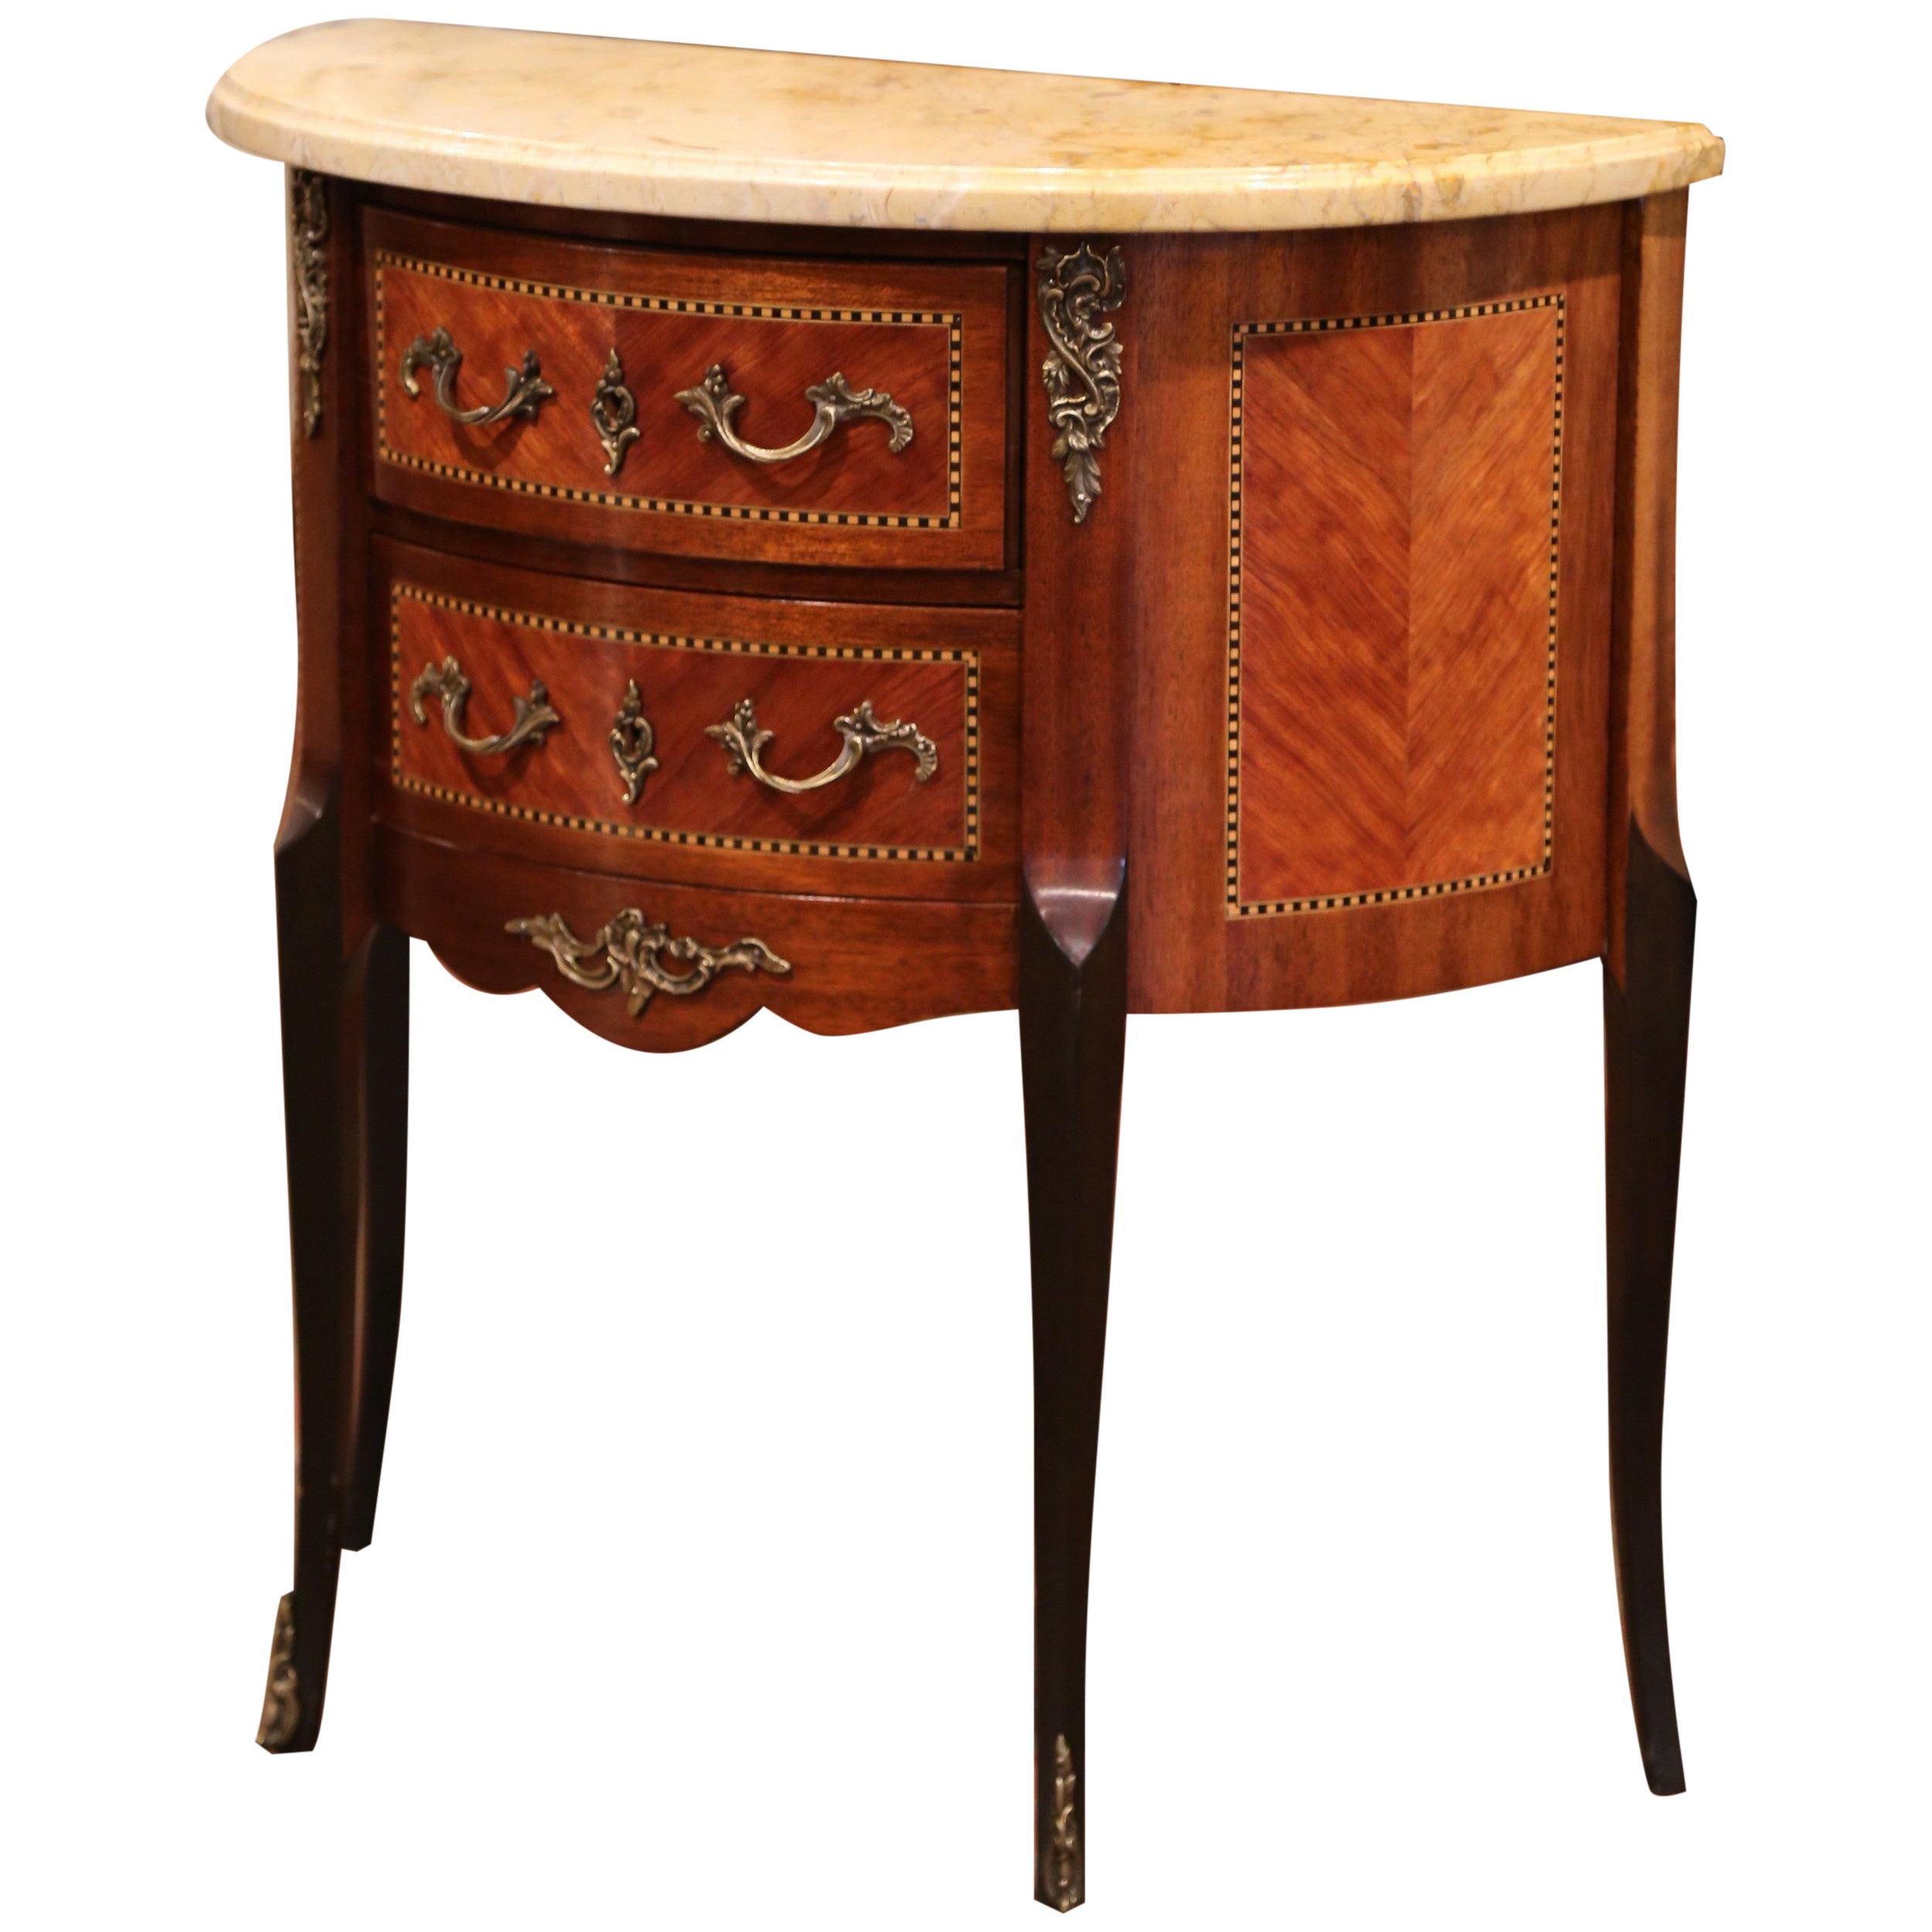 Early 20th Century French Louis XV Carved Walnut Inlay Commode with Beige Marble